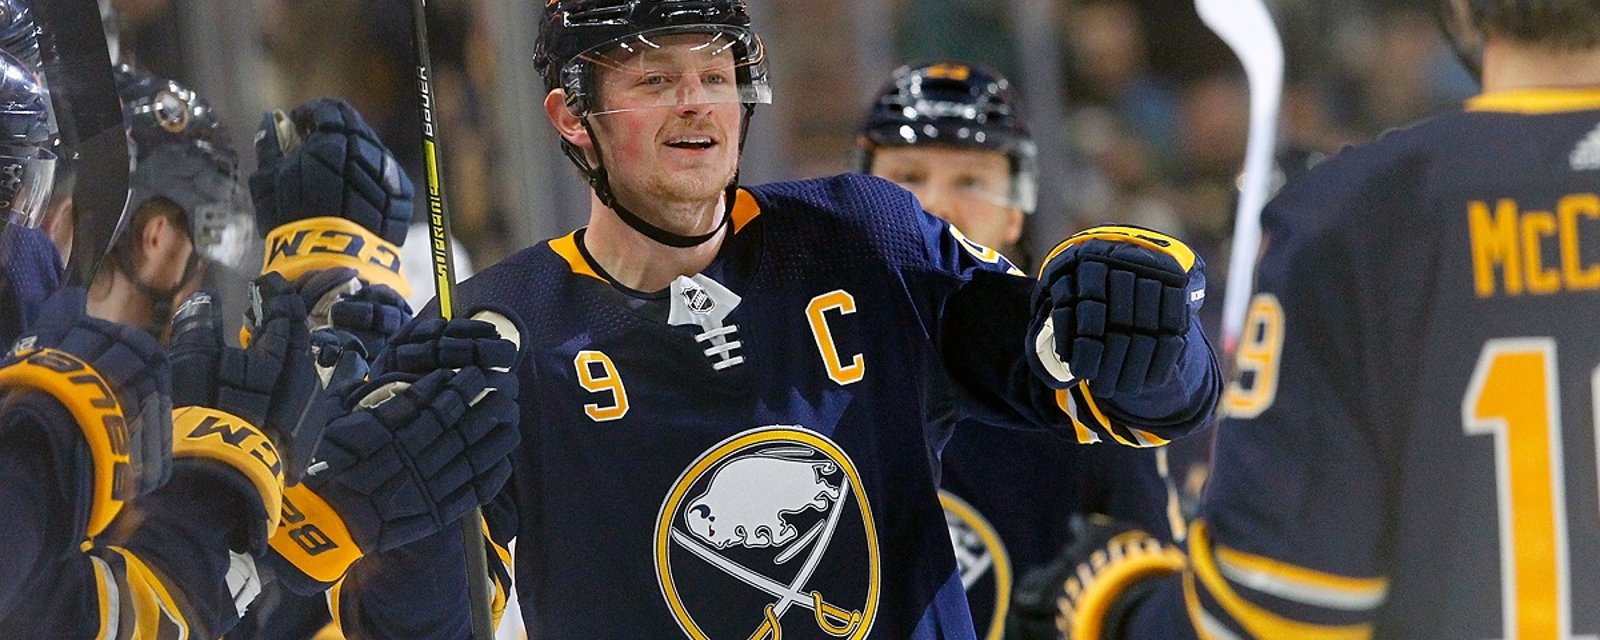 Sabres refusing to budge on Eichel trade, at least 1 team has pulled out of talks.